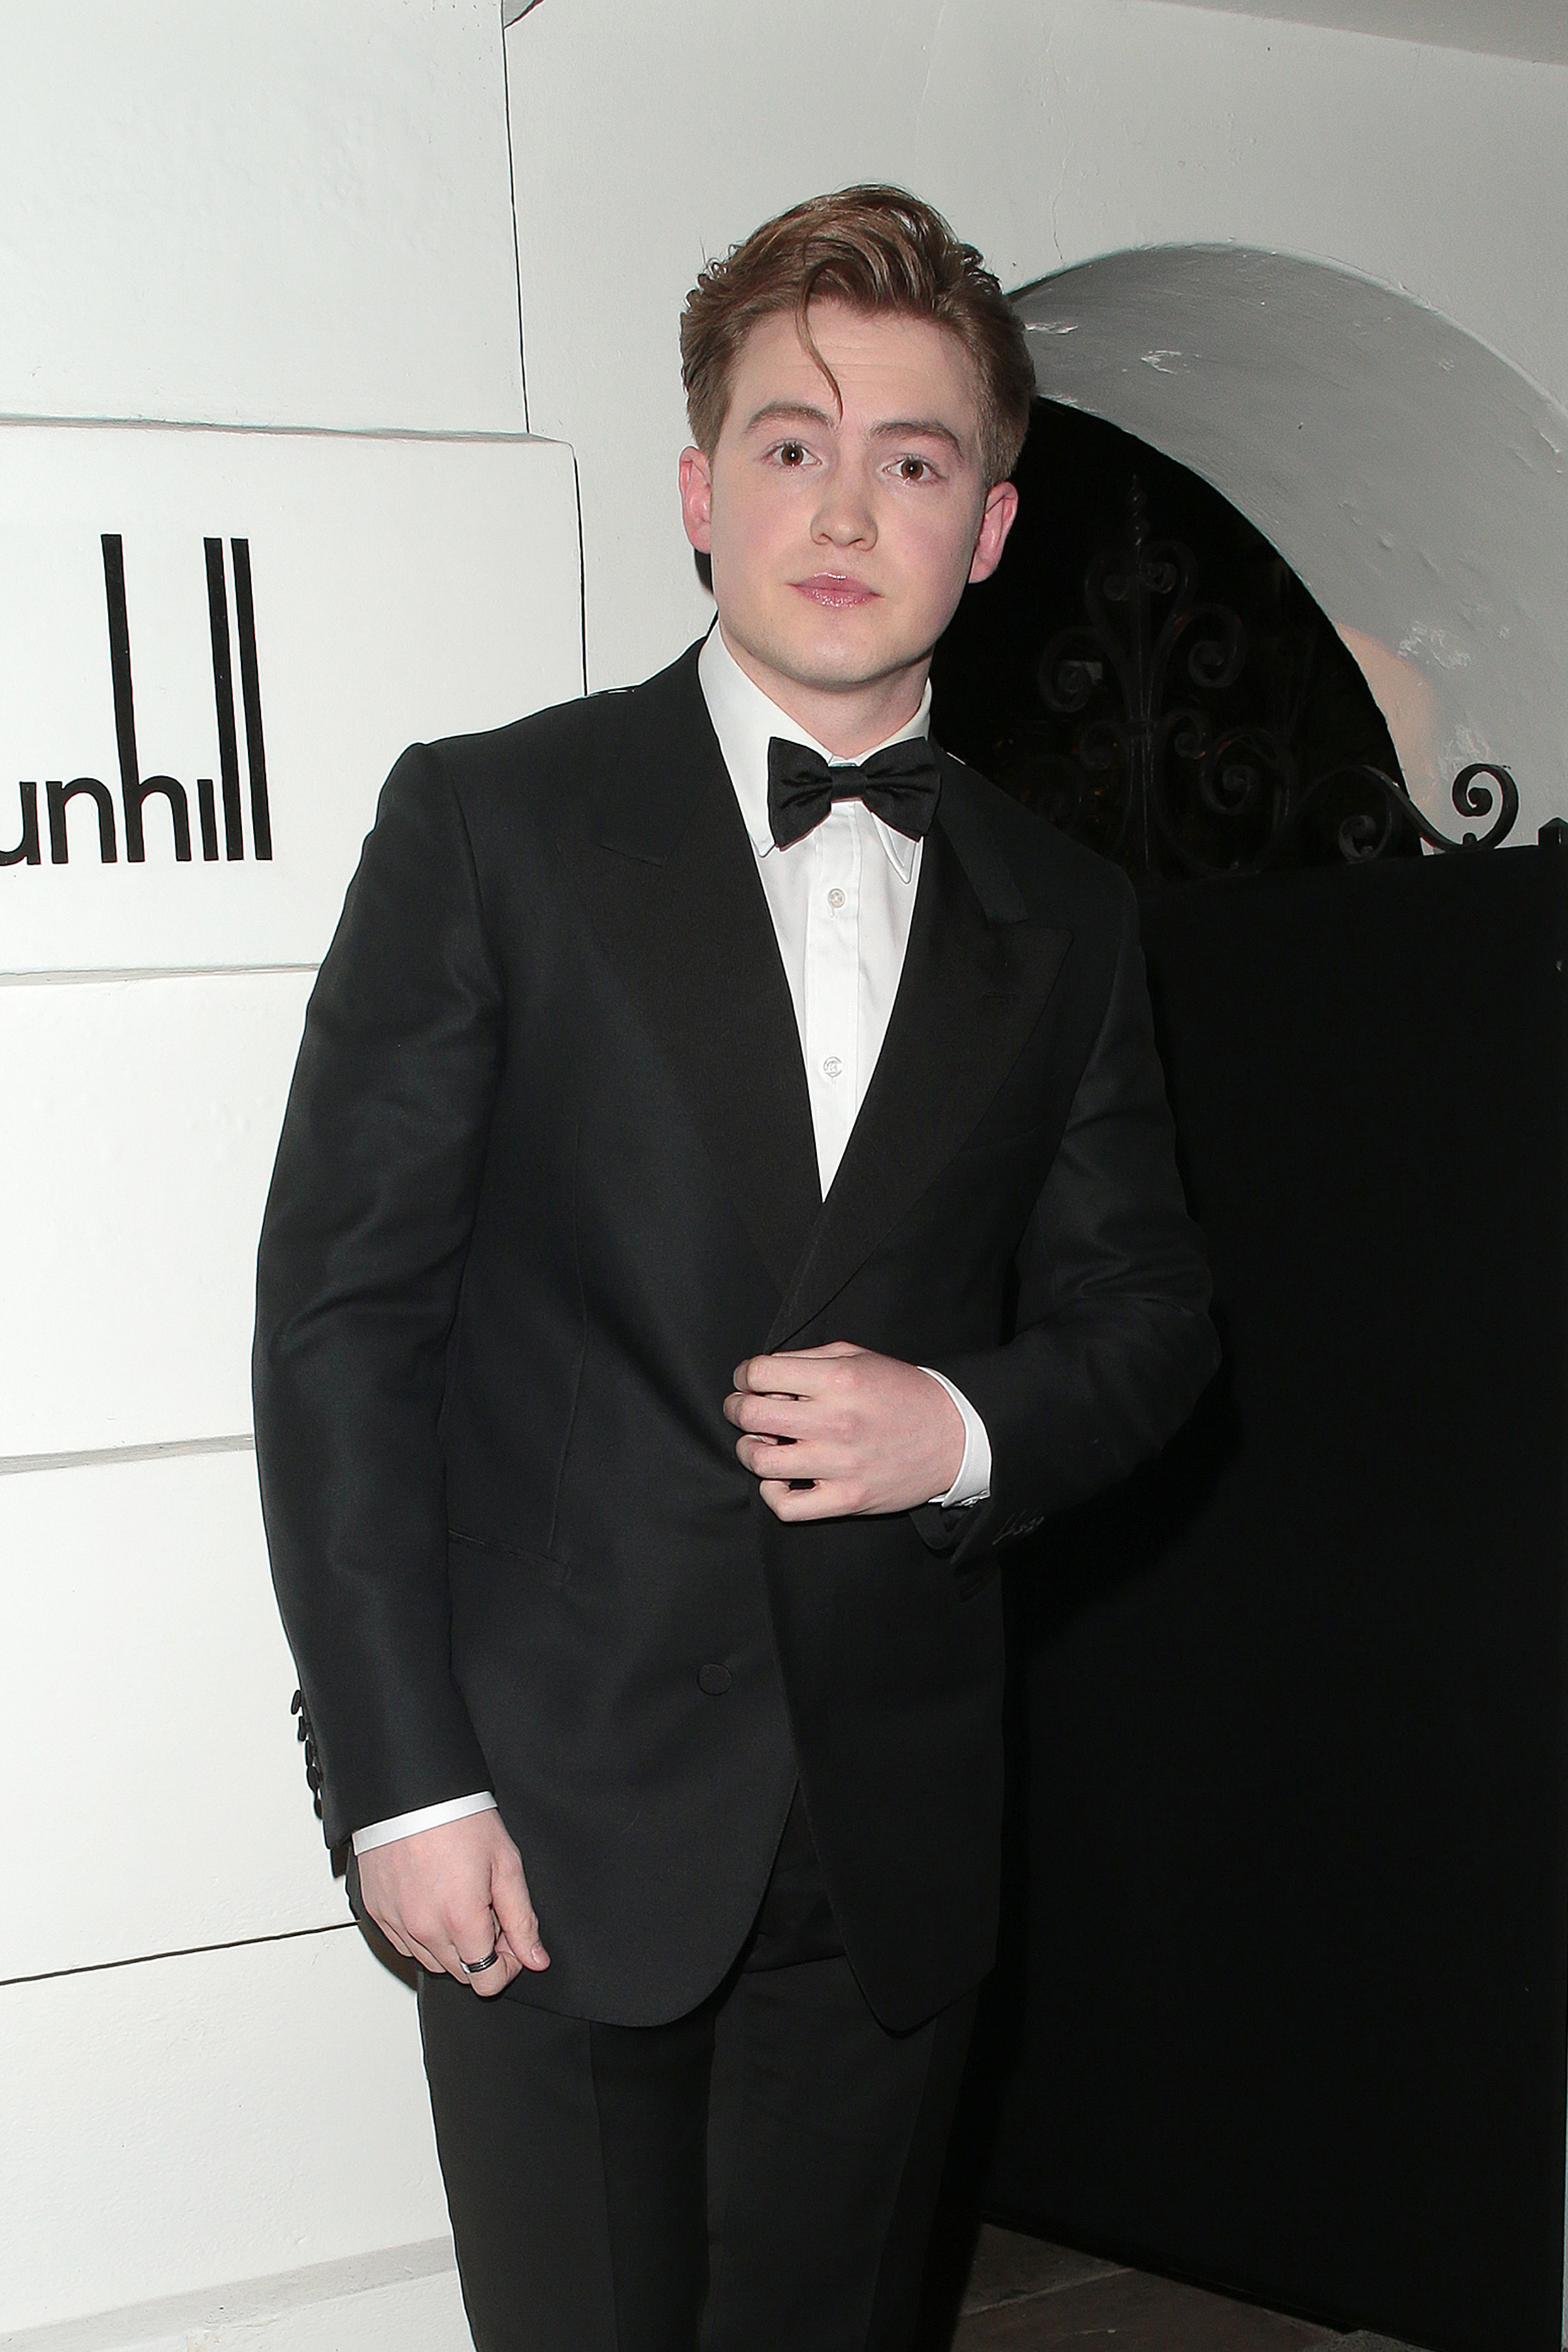 Kit at an event wearing a suit and bowtie